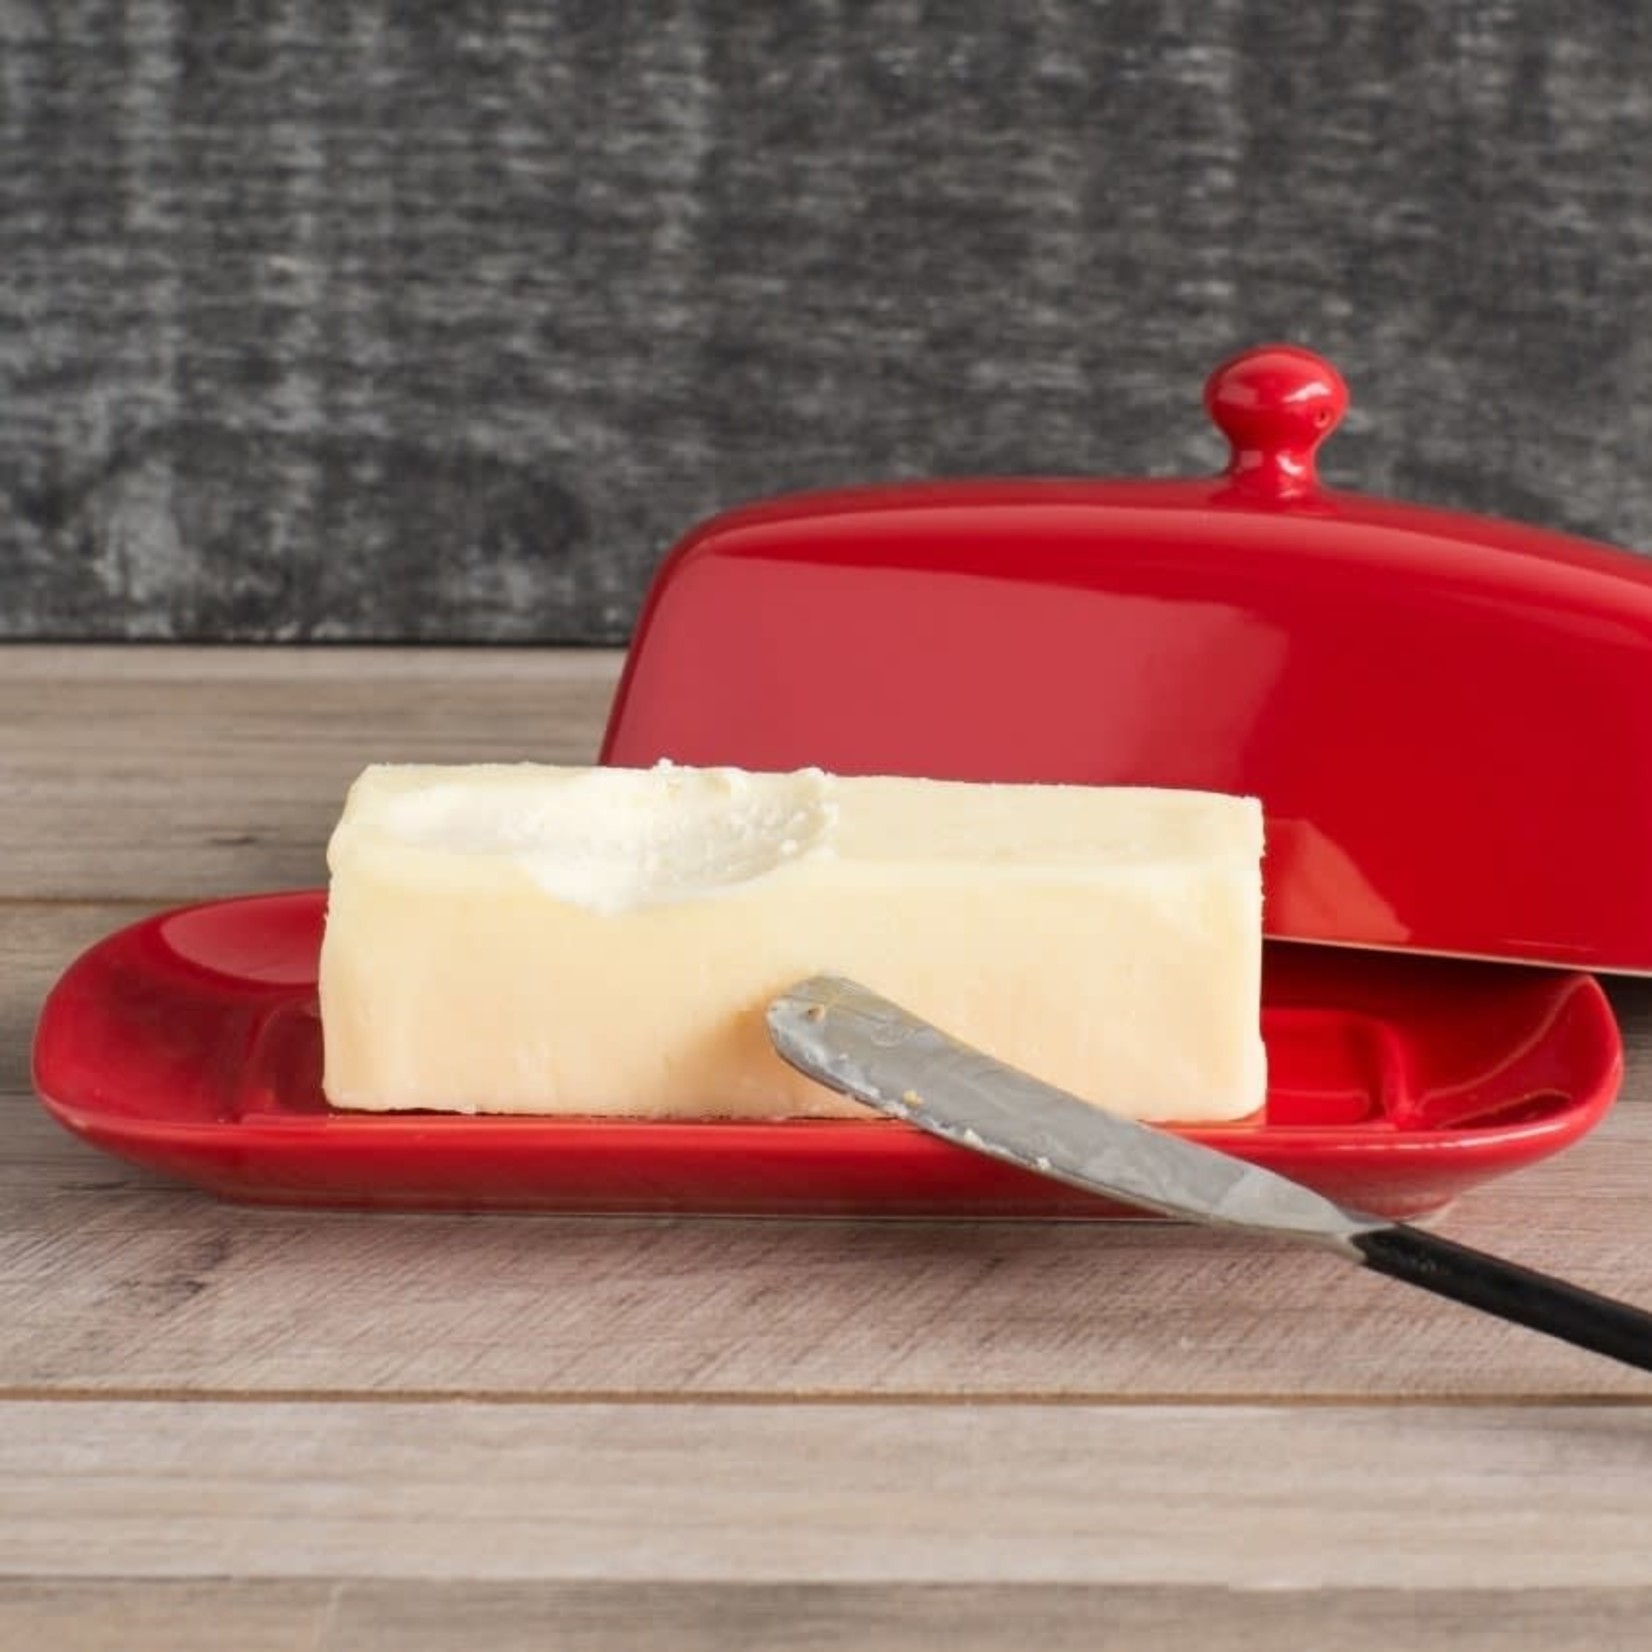 NOW DESIGNS NOW DESIGNS Rectangular Butter Dish - Red